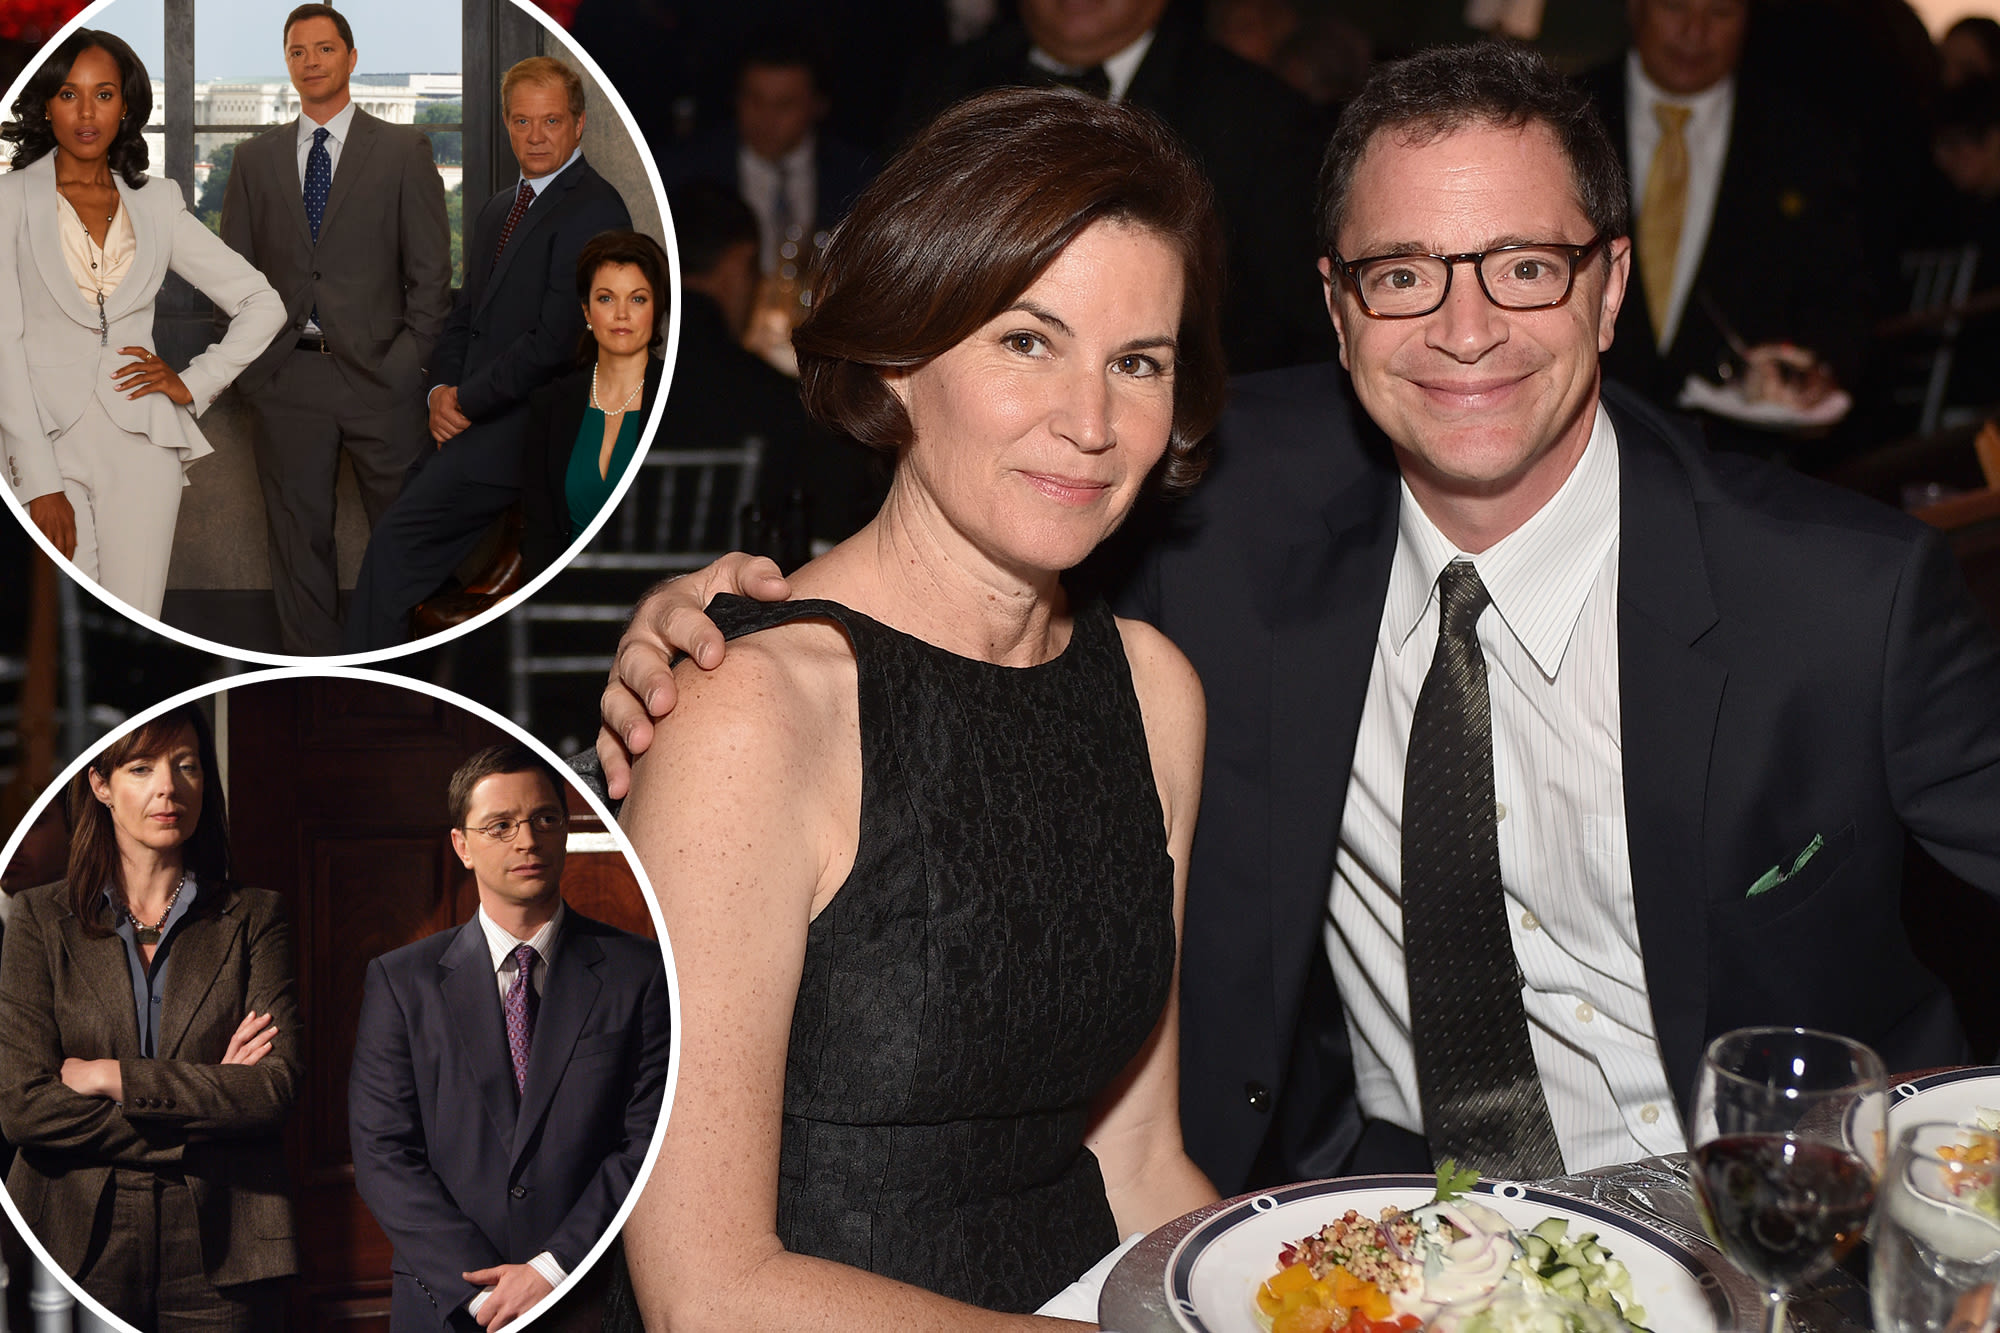 ‘West Wing’ star Joshua Malina’s wife files for divorce, seeks spousal support after nearly 28 years of marriage